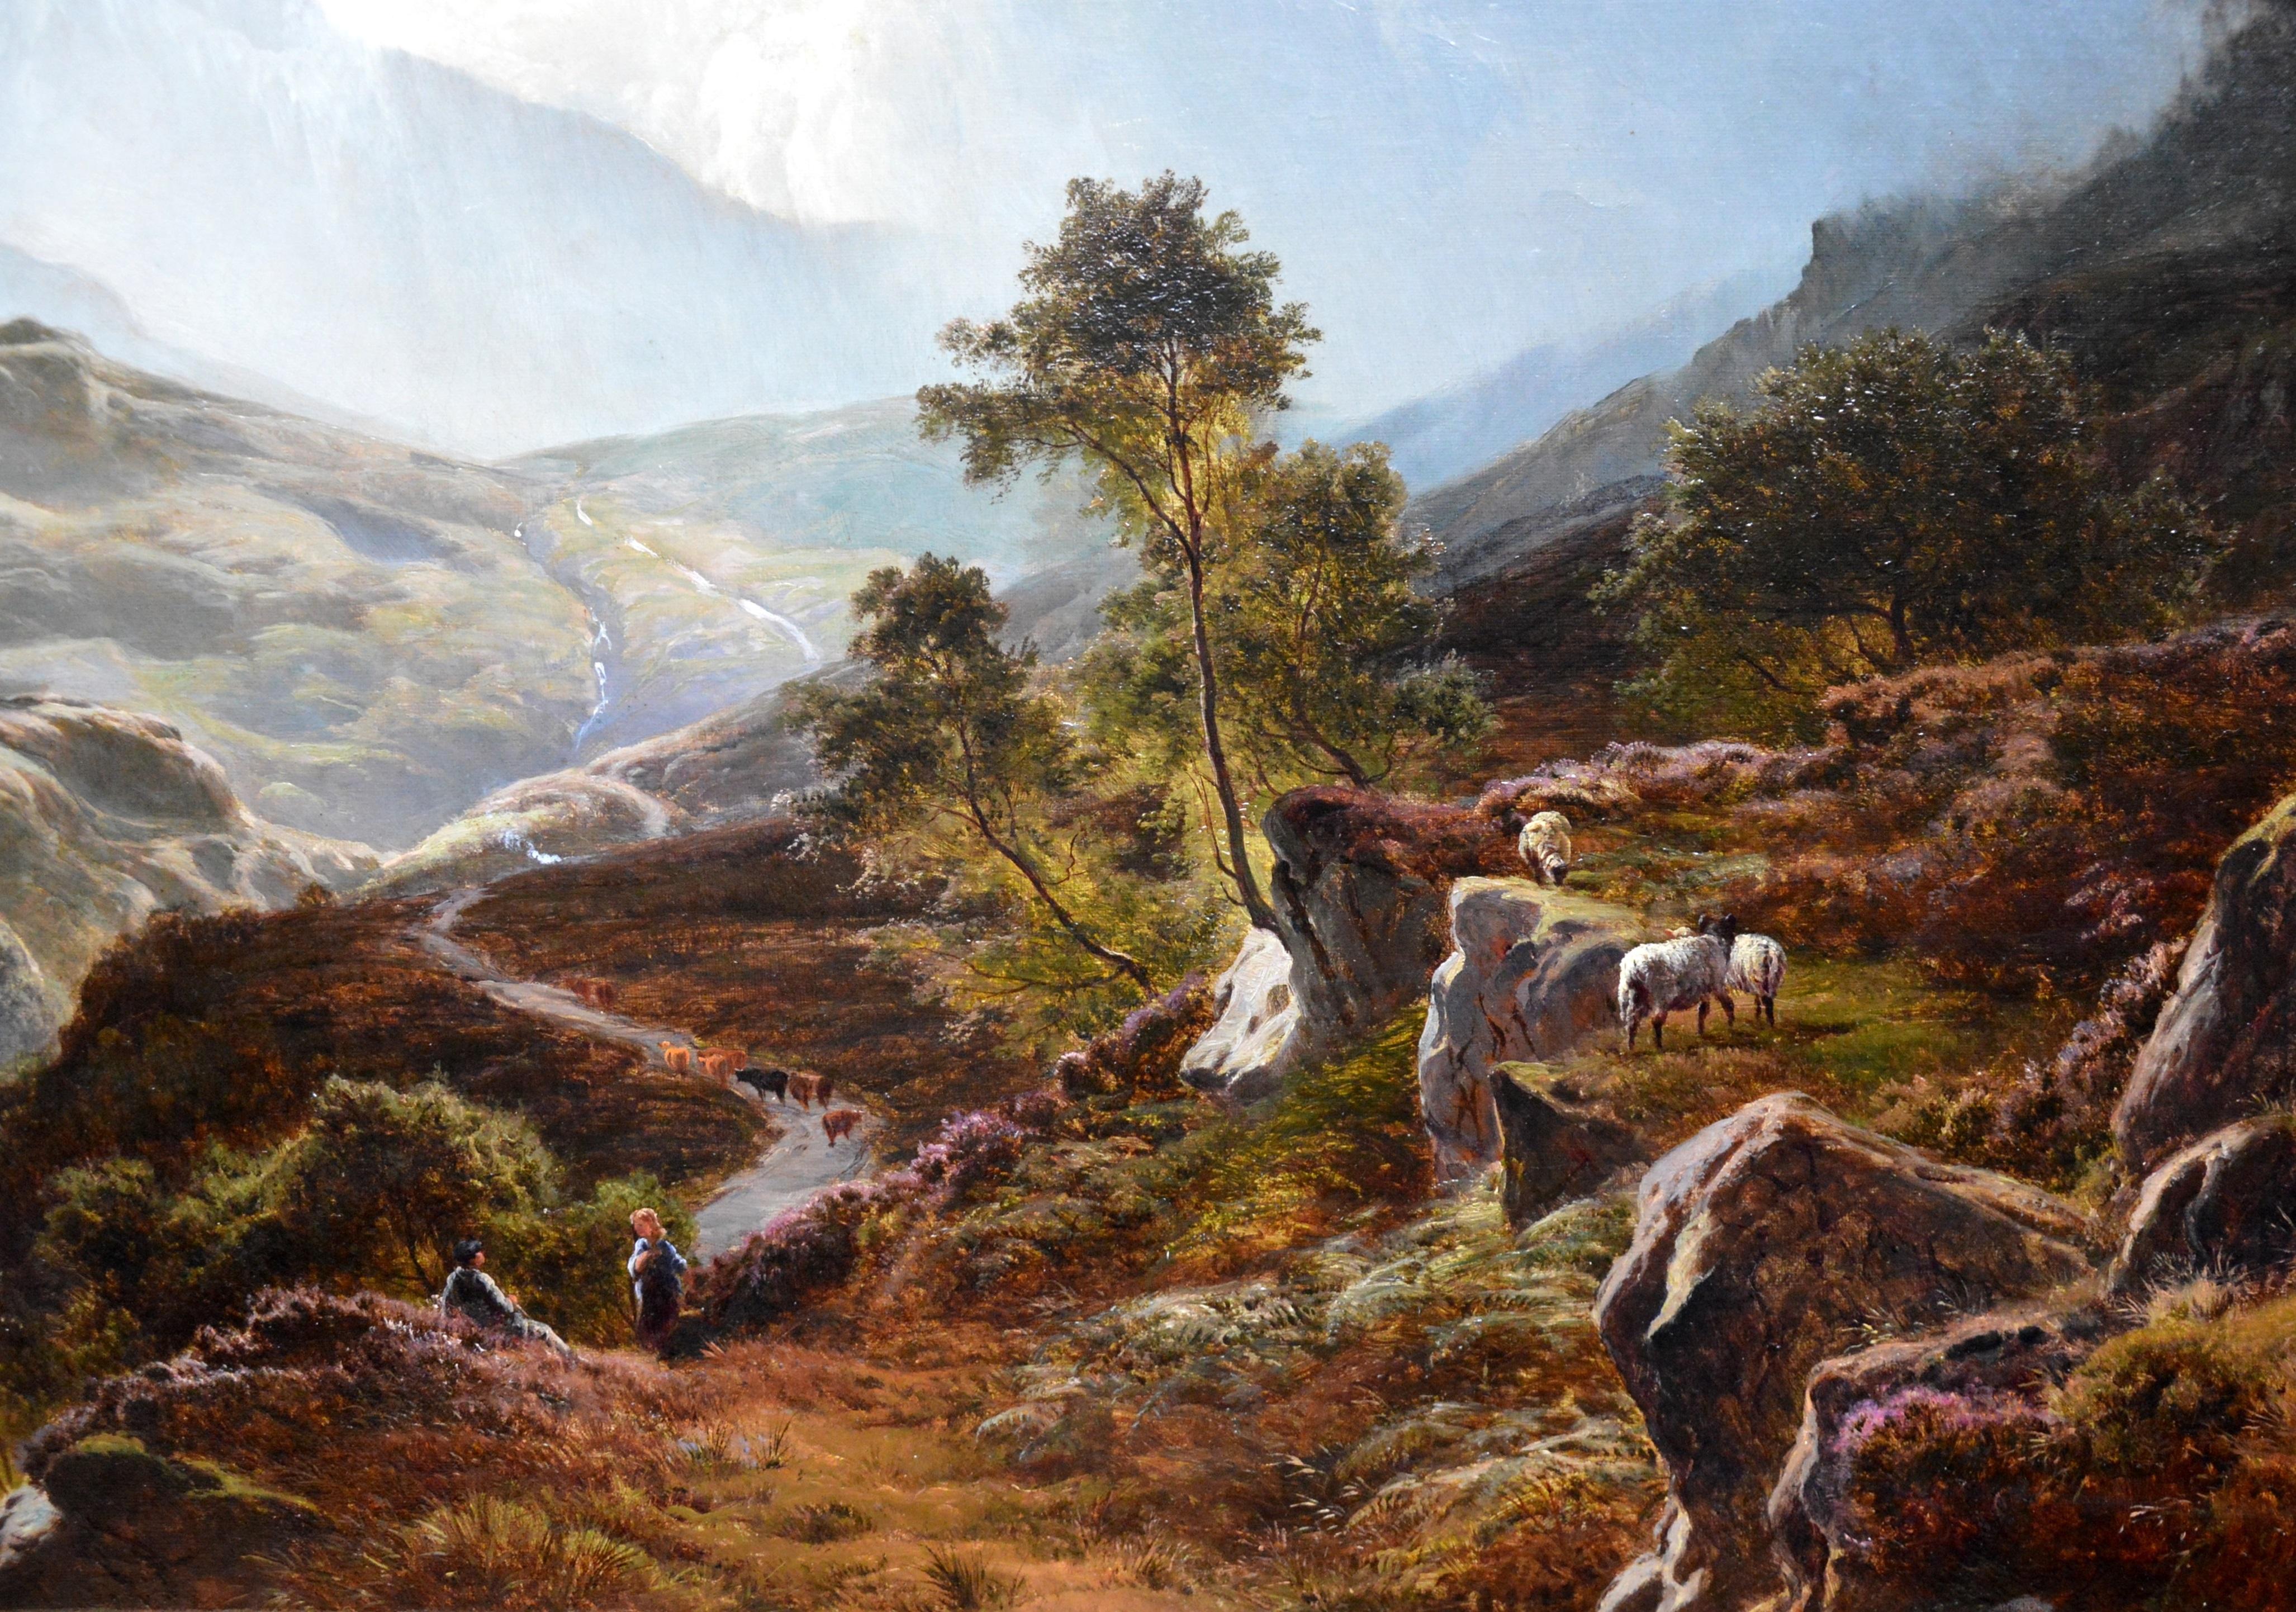 This is a large fine 19th century oil on canvas depicting the meeting of a young shepherdess and a cattle herder before a breath-taking Scottish Highland landscape in ‘Glen Coe, Argyllshire’ by the important British painter Sidney Richard Percy